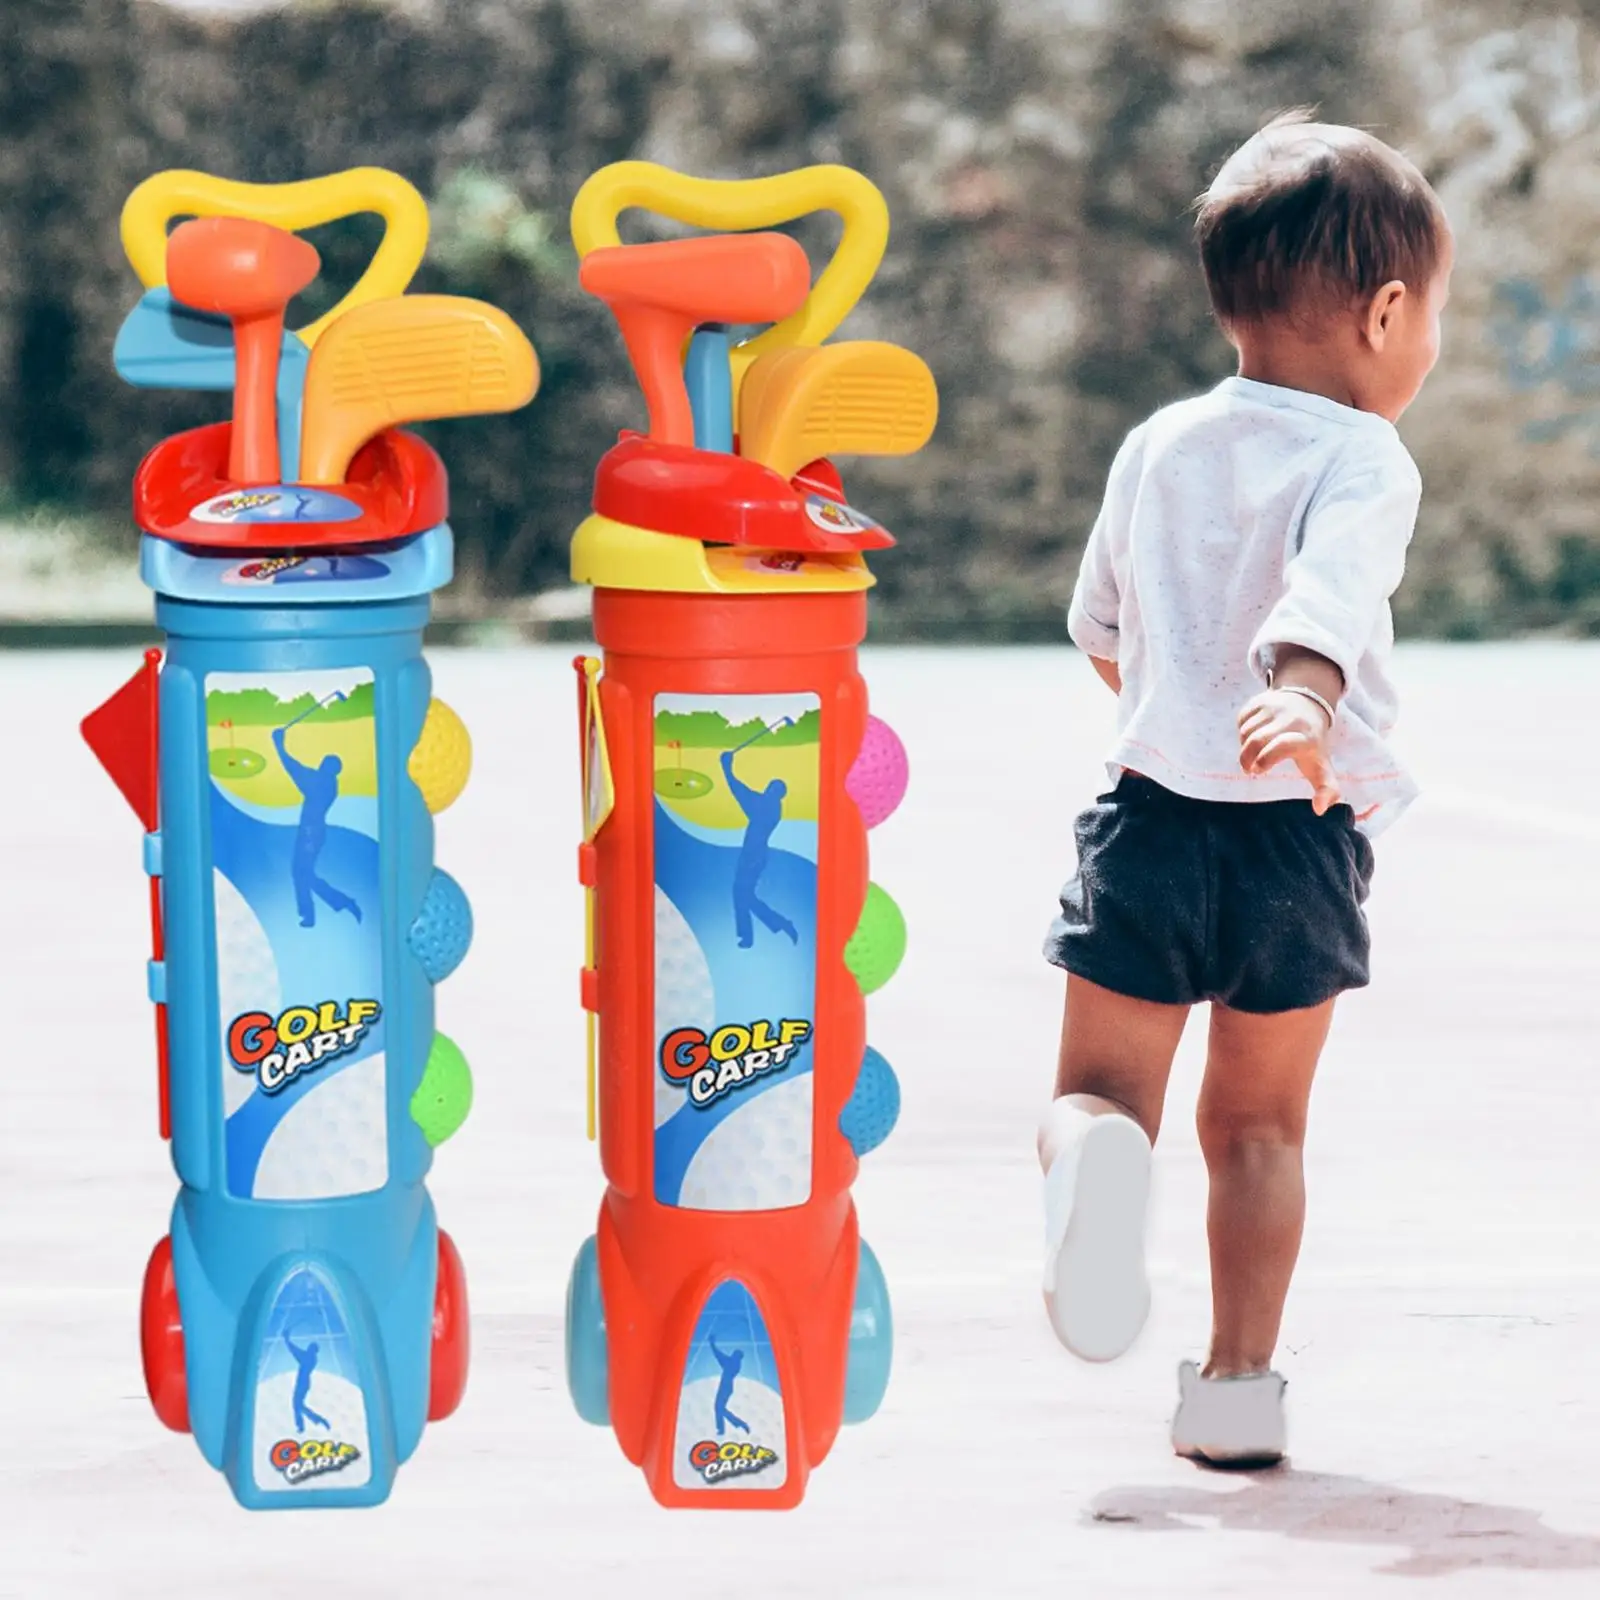 Kids Golf Clubs Set Exercise Toy with Golf Clubs Training Golf Toy for Birthday Gifts